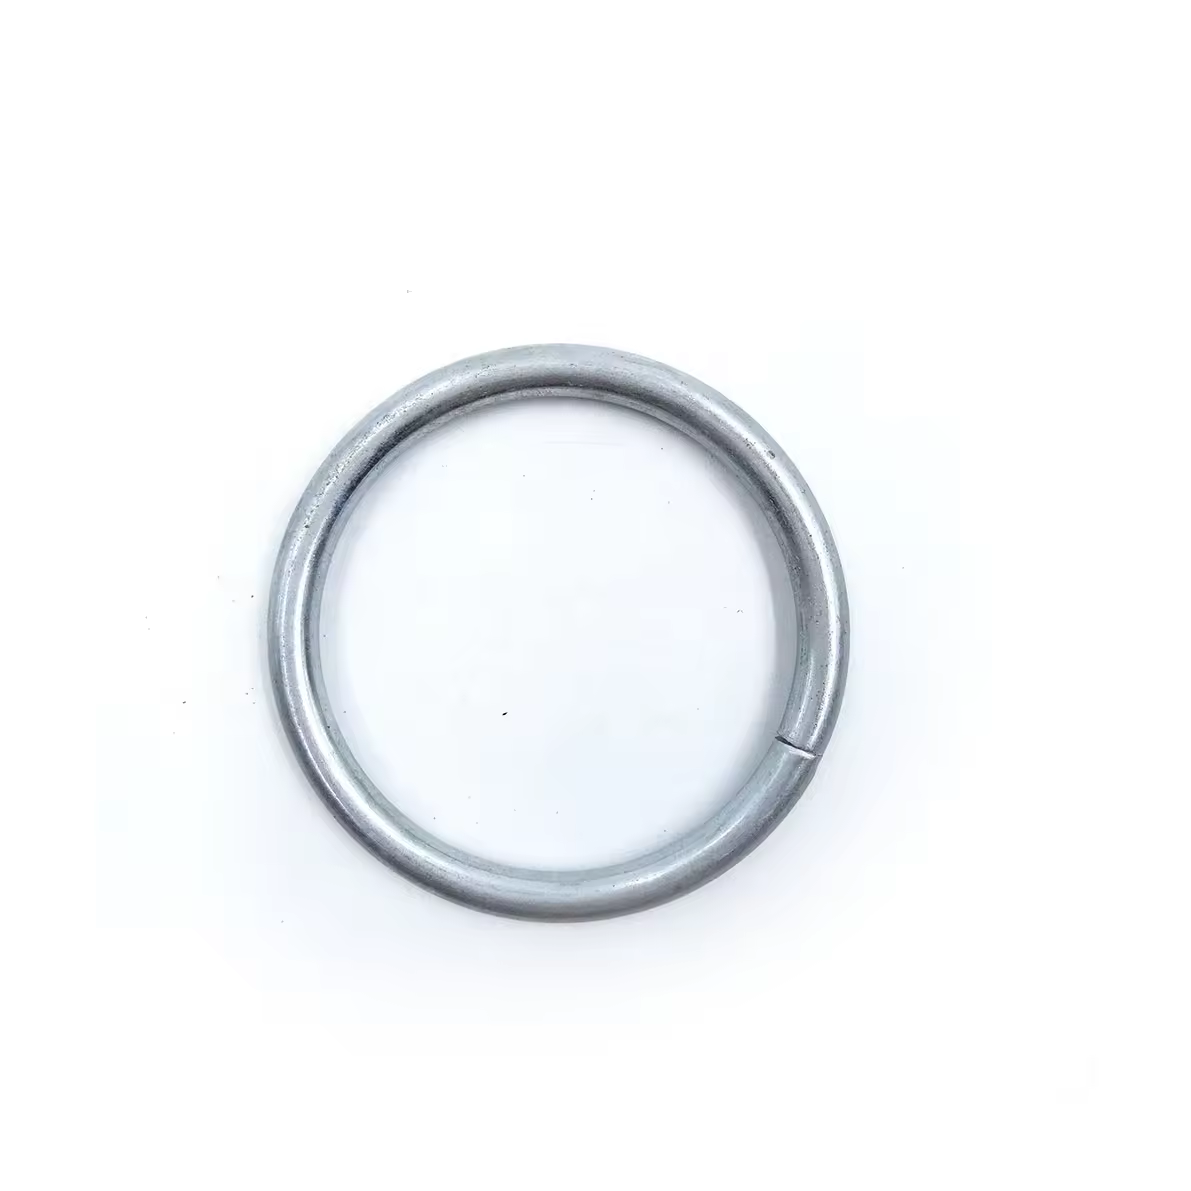 New designed customizable diverse styles industrial widely used welded O ring